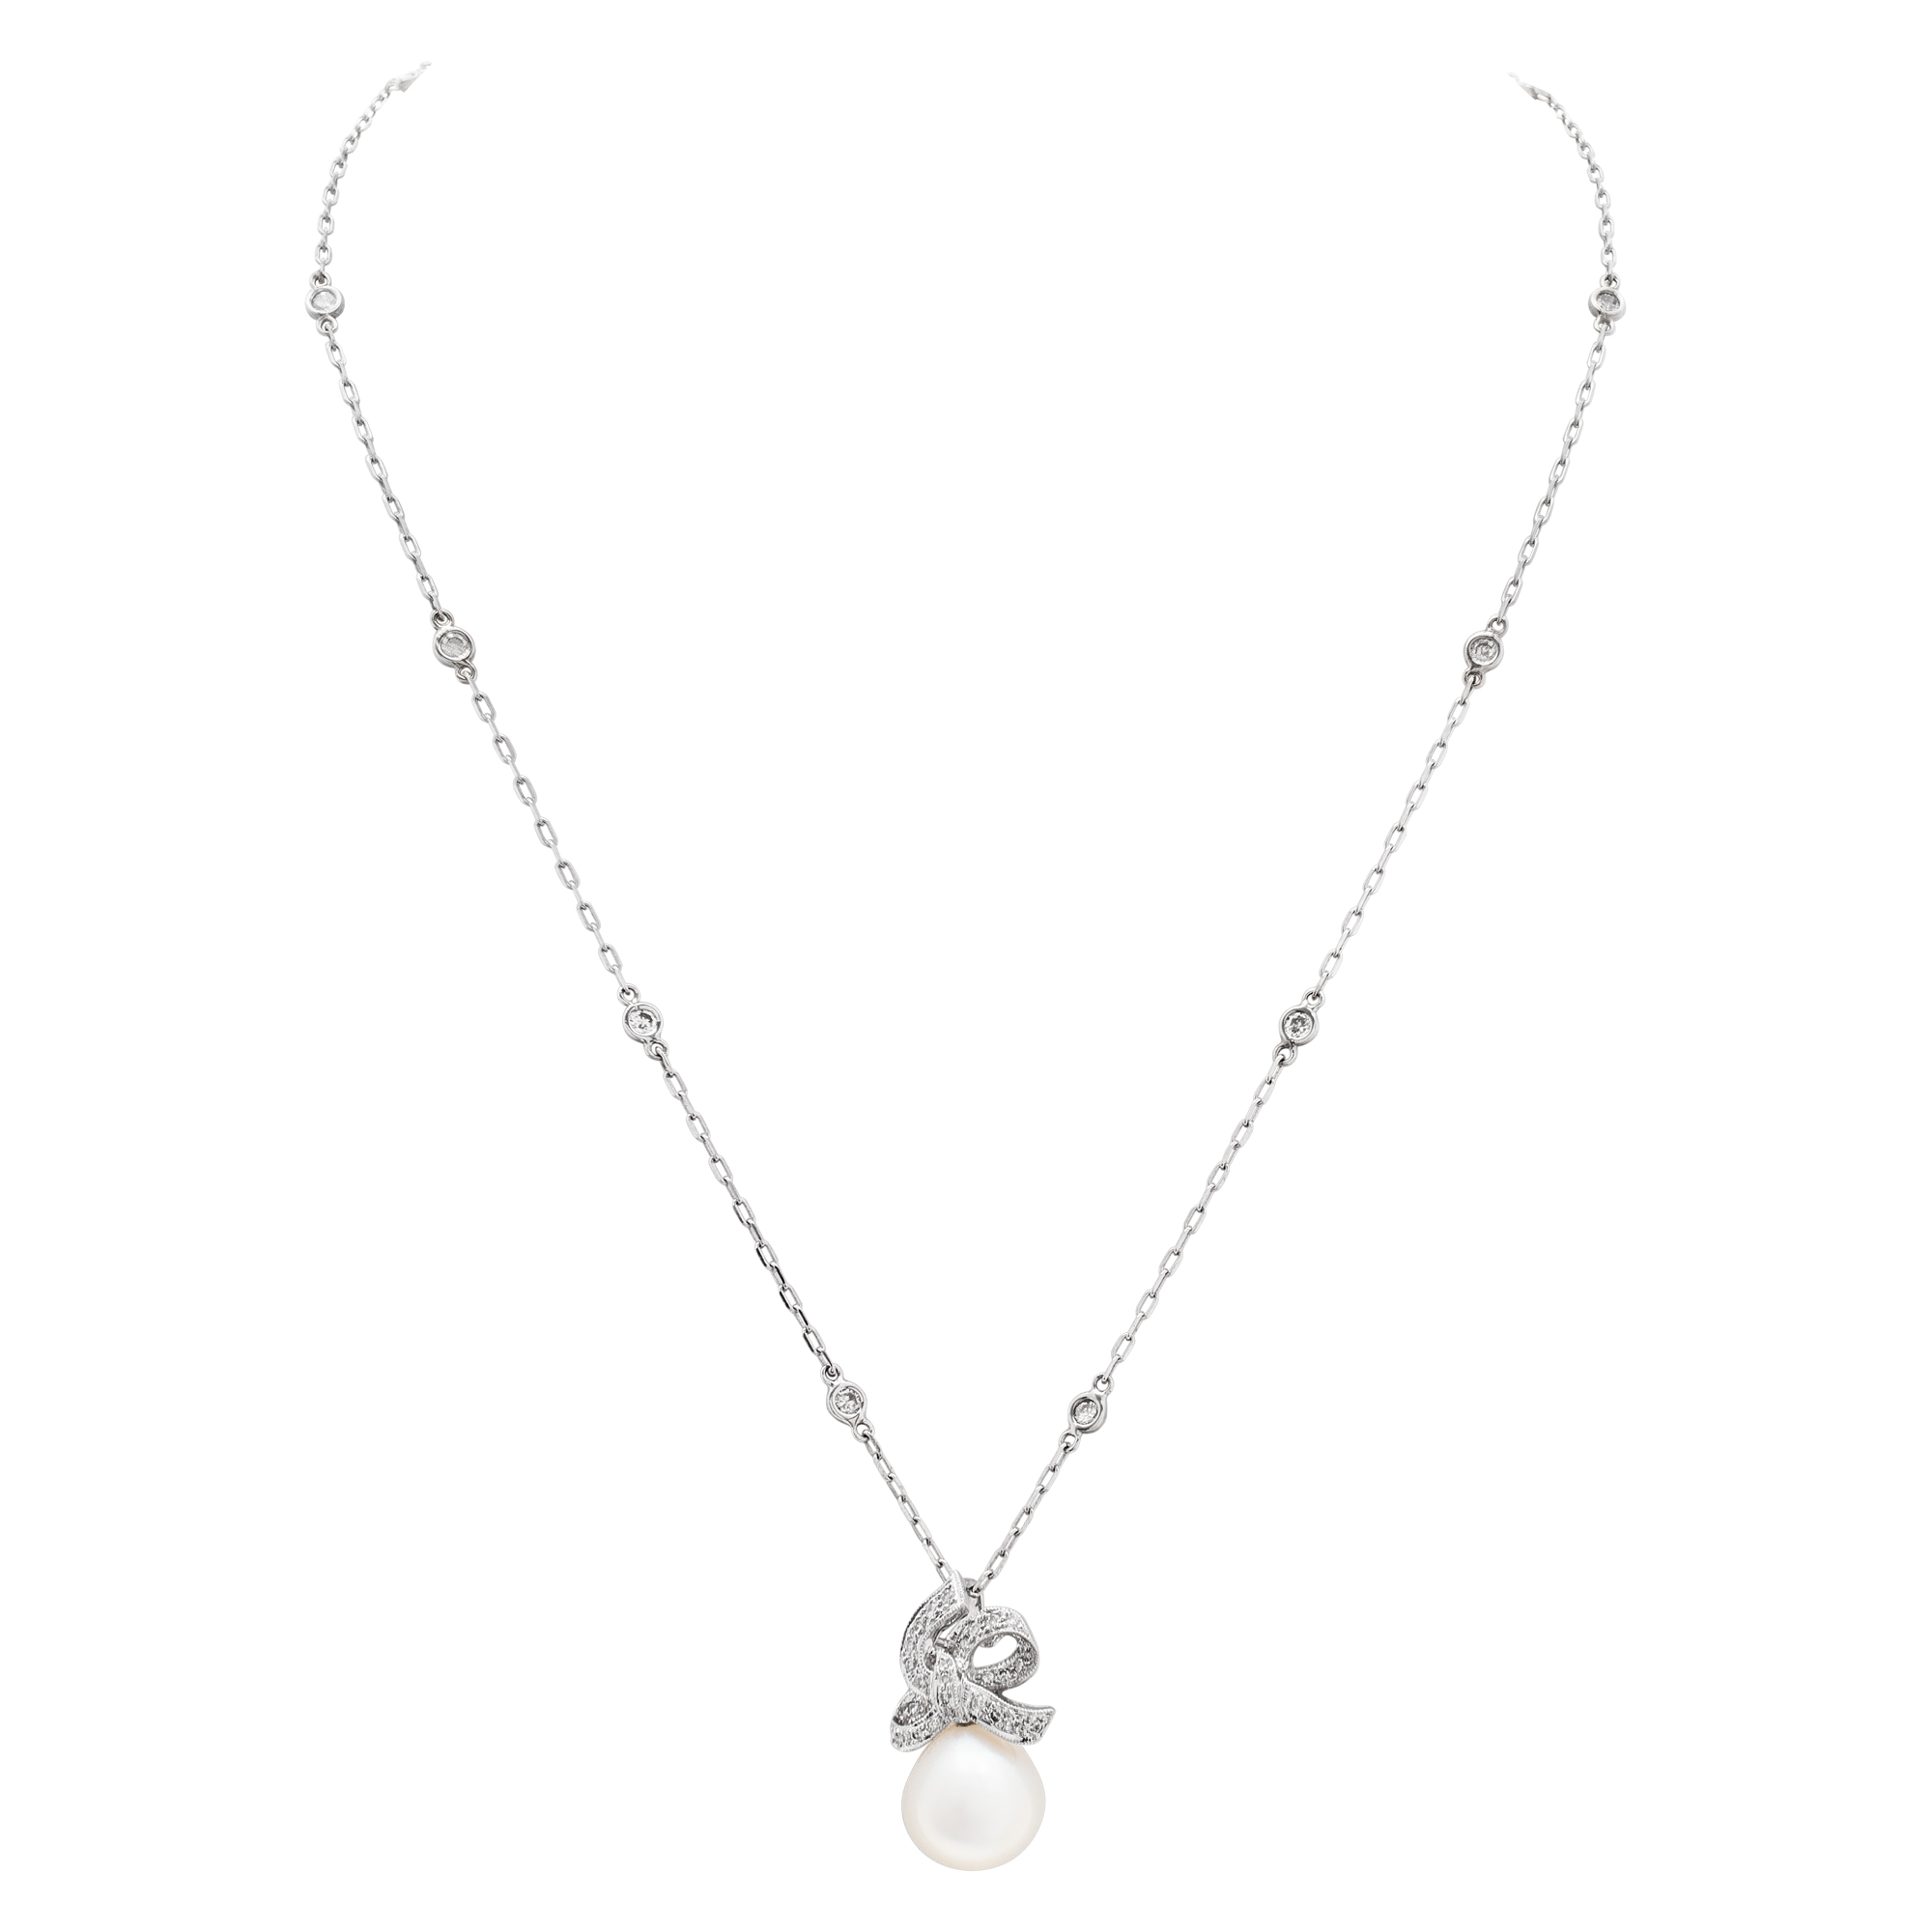 Fresh water pearl (12 x 12.5mm) and diamond pendant in 18k white gold with 14k white gold diamonds by the yard chain image 2